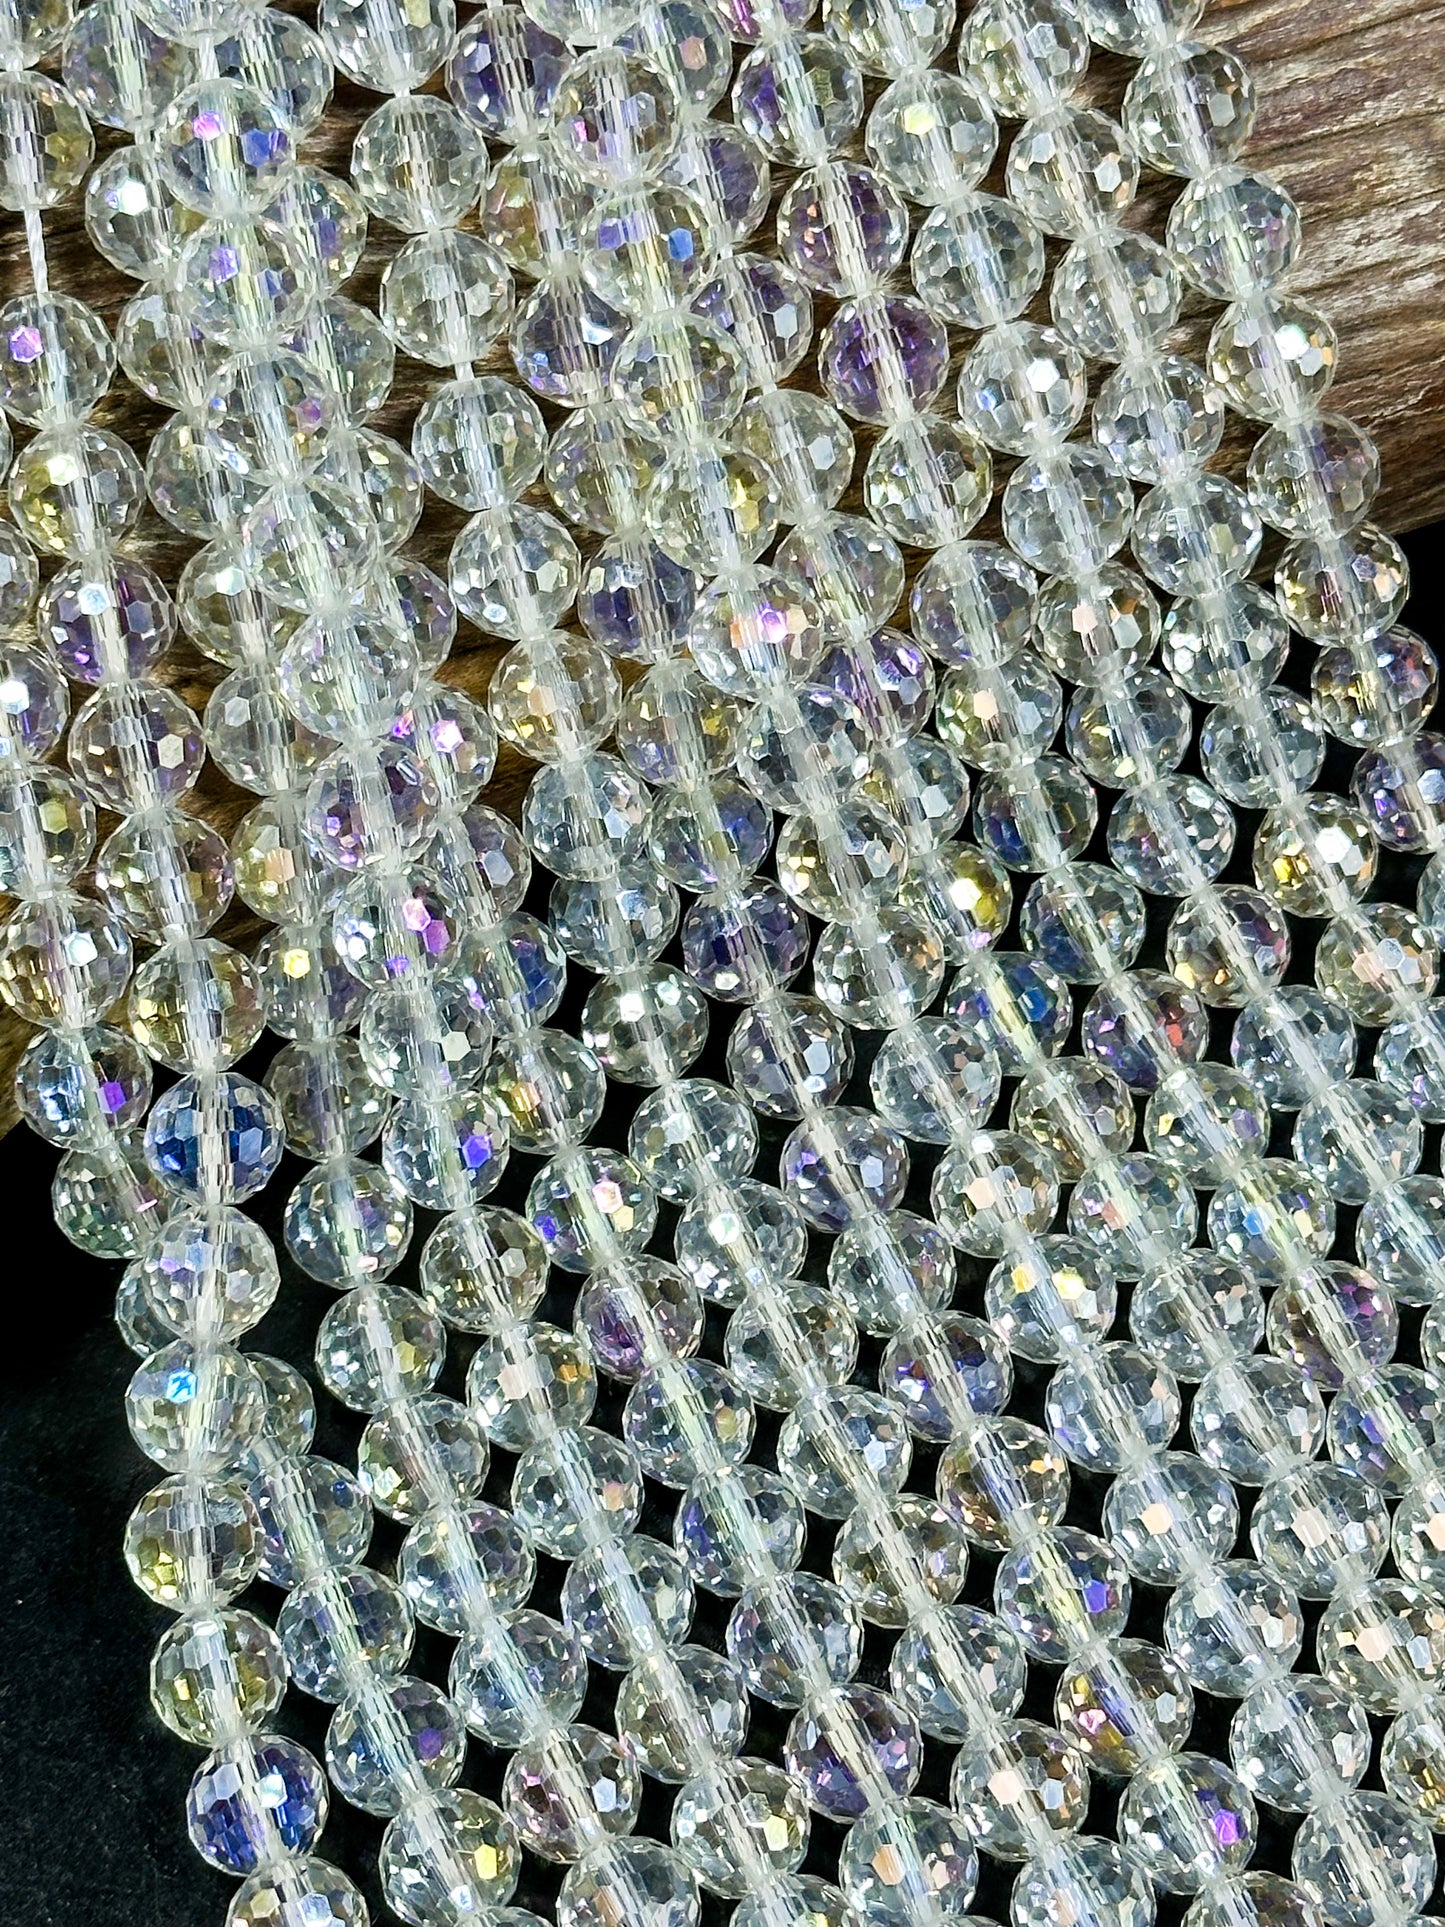 Beautiful Chinese Crystal Glass Bead Faceted 9mm Round Bead, Gorgeous Iridescent Clear Color Crystal Beads, Great Quality Glass